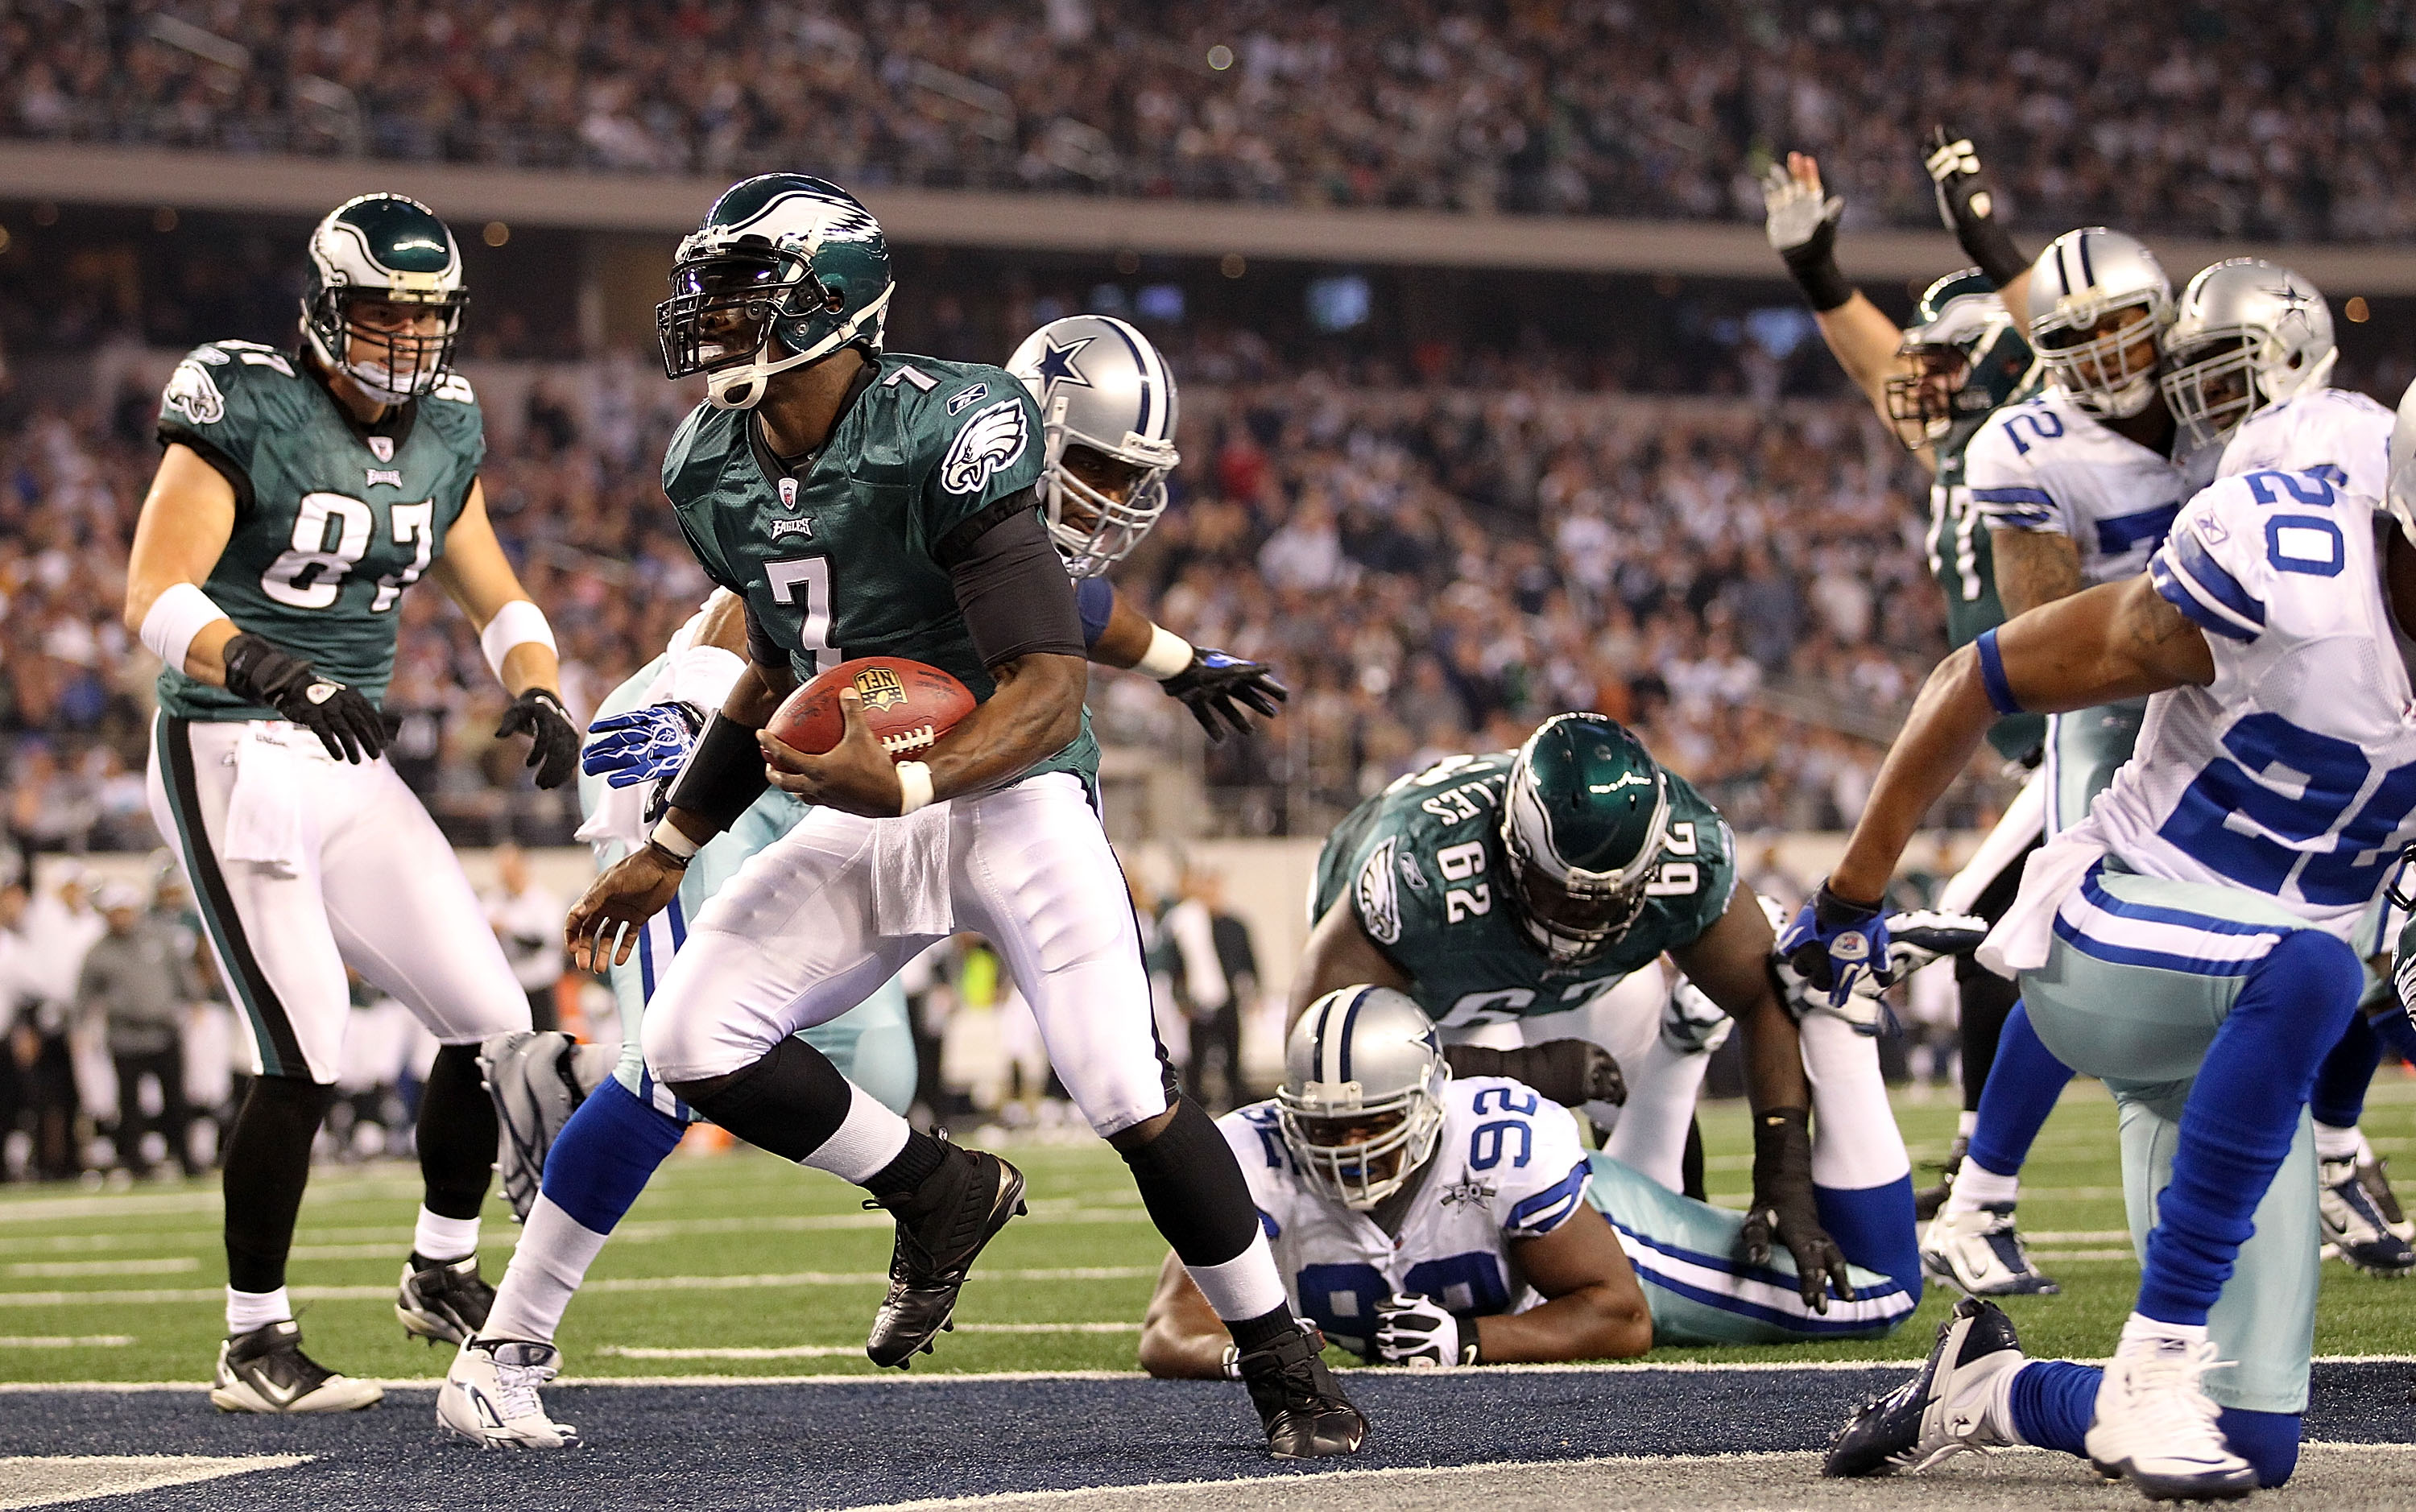 ARLINGTON, TX - DECEMBER 12:  Quarterback Michael Vick #7 of the Philadelphia Eagles runs for a touchdown against the Dallas Cowboys at Cowboys Stadium on December 12, 2010 in Arlington, Texas.  (Photo by Ronald Martinez/Getty Images)